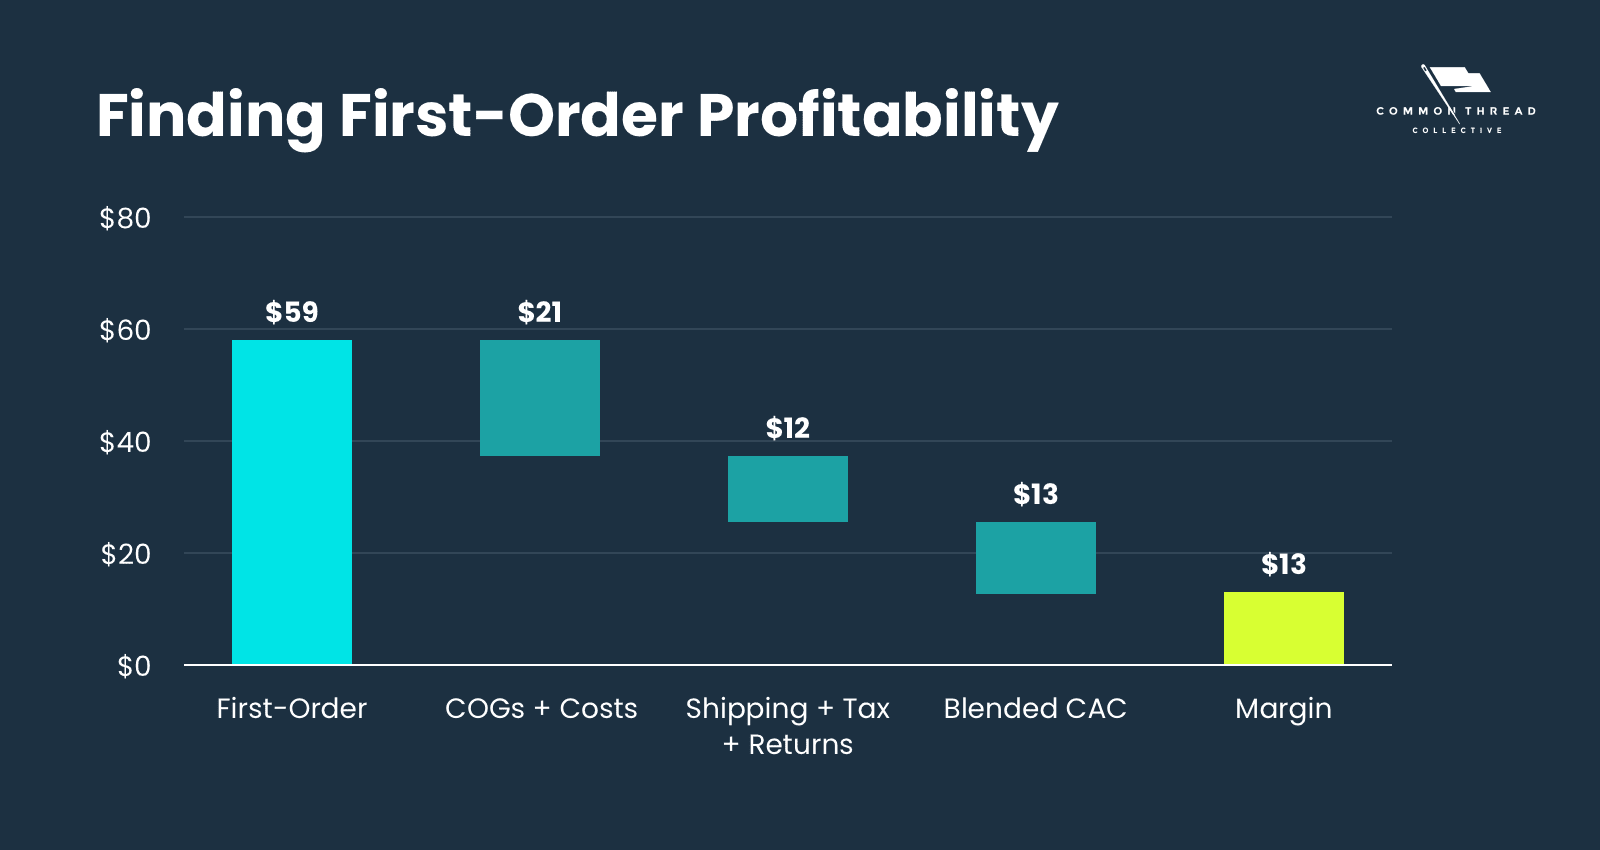 Finding First-Order Profitability